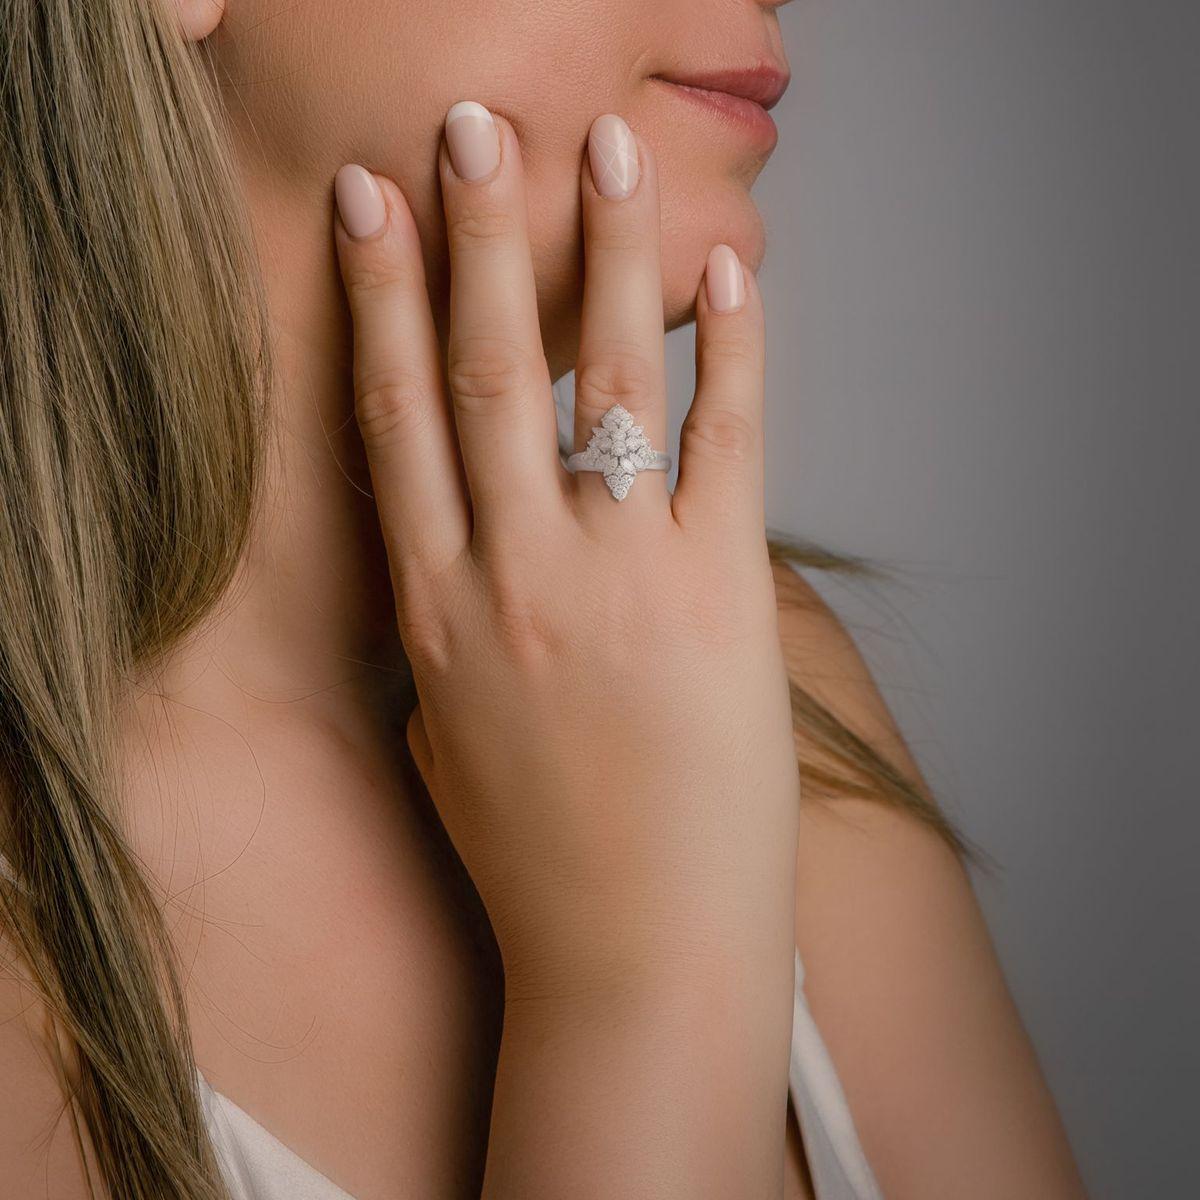 The setting, made from high-quality 18K white gold, enhances the overall sophistication of the ring. The cool, silvery tones of white gold provide a luxurious backdrop, allowing the diamond's brilliance to shine with timeless elegance. The intricate